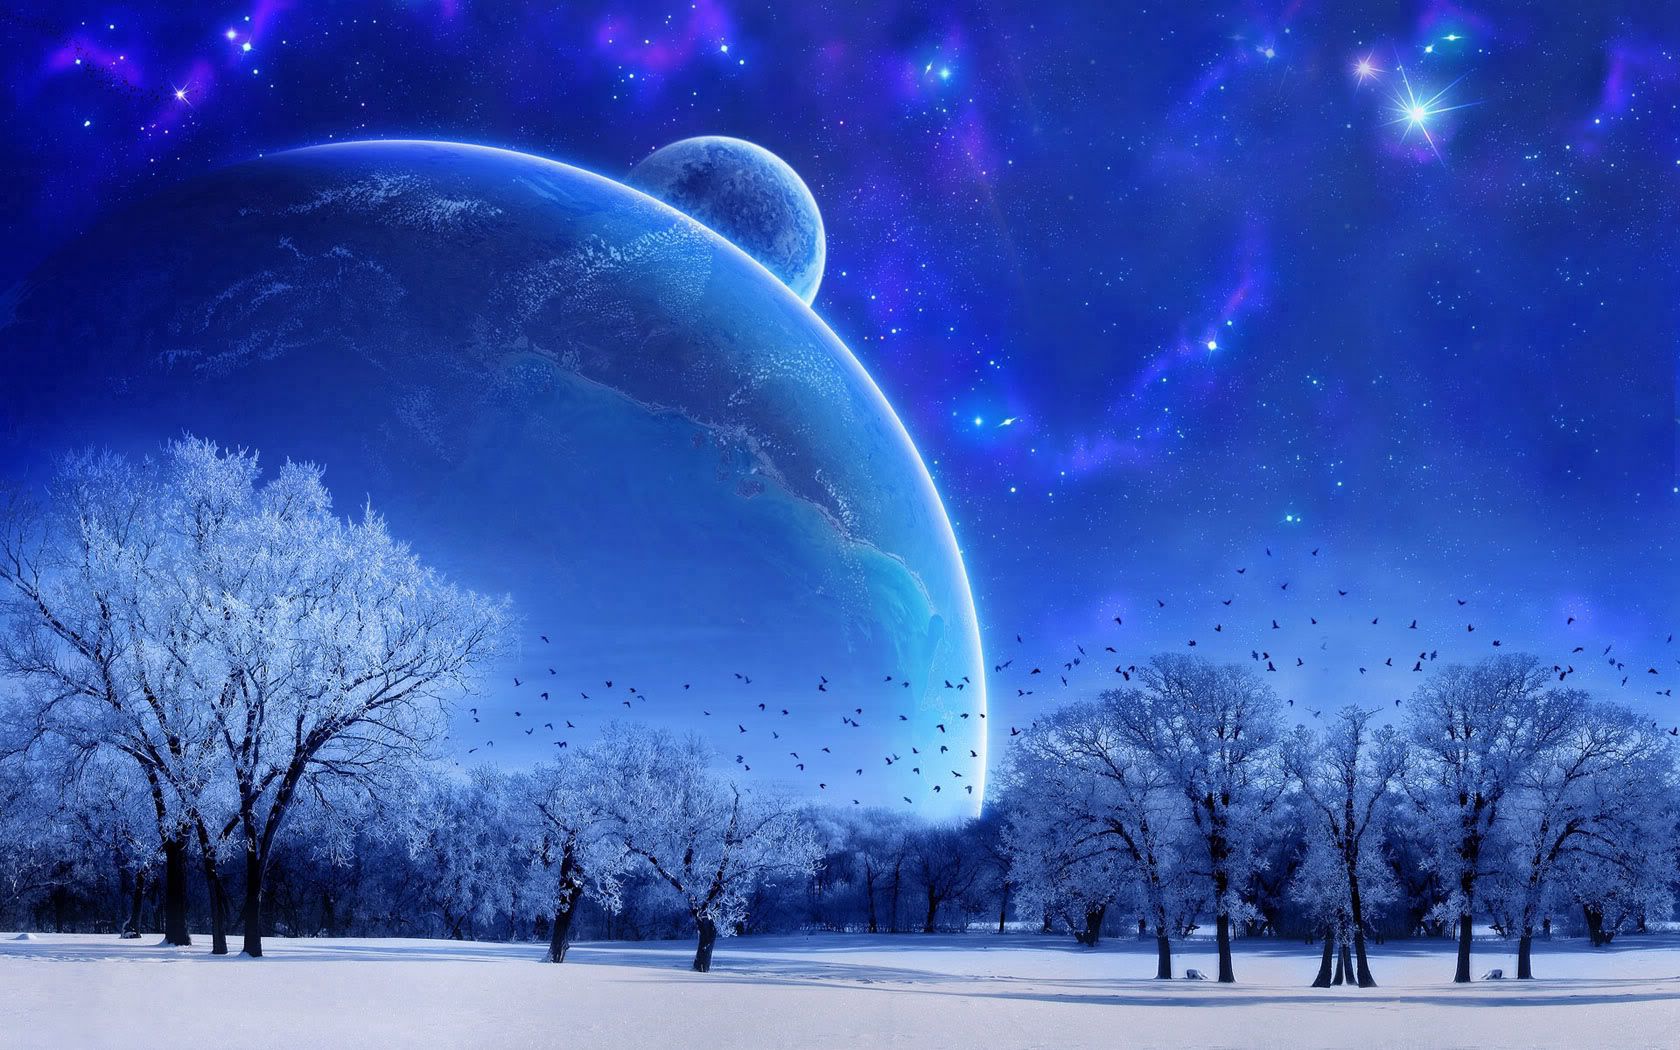 android sky, landscape, nature, abstract, full moon, snow, winter, birds, trees, evening